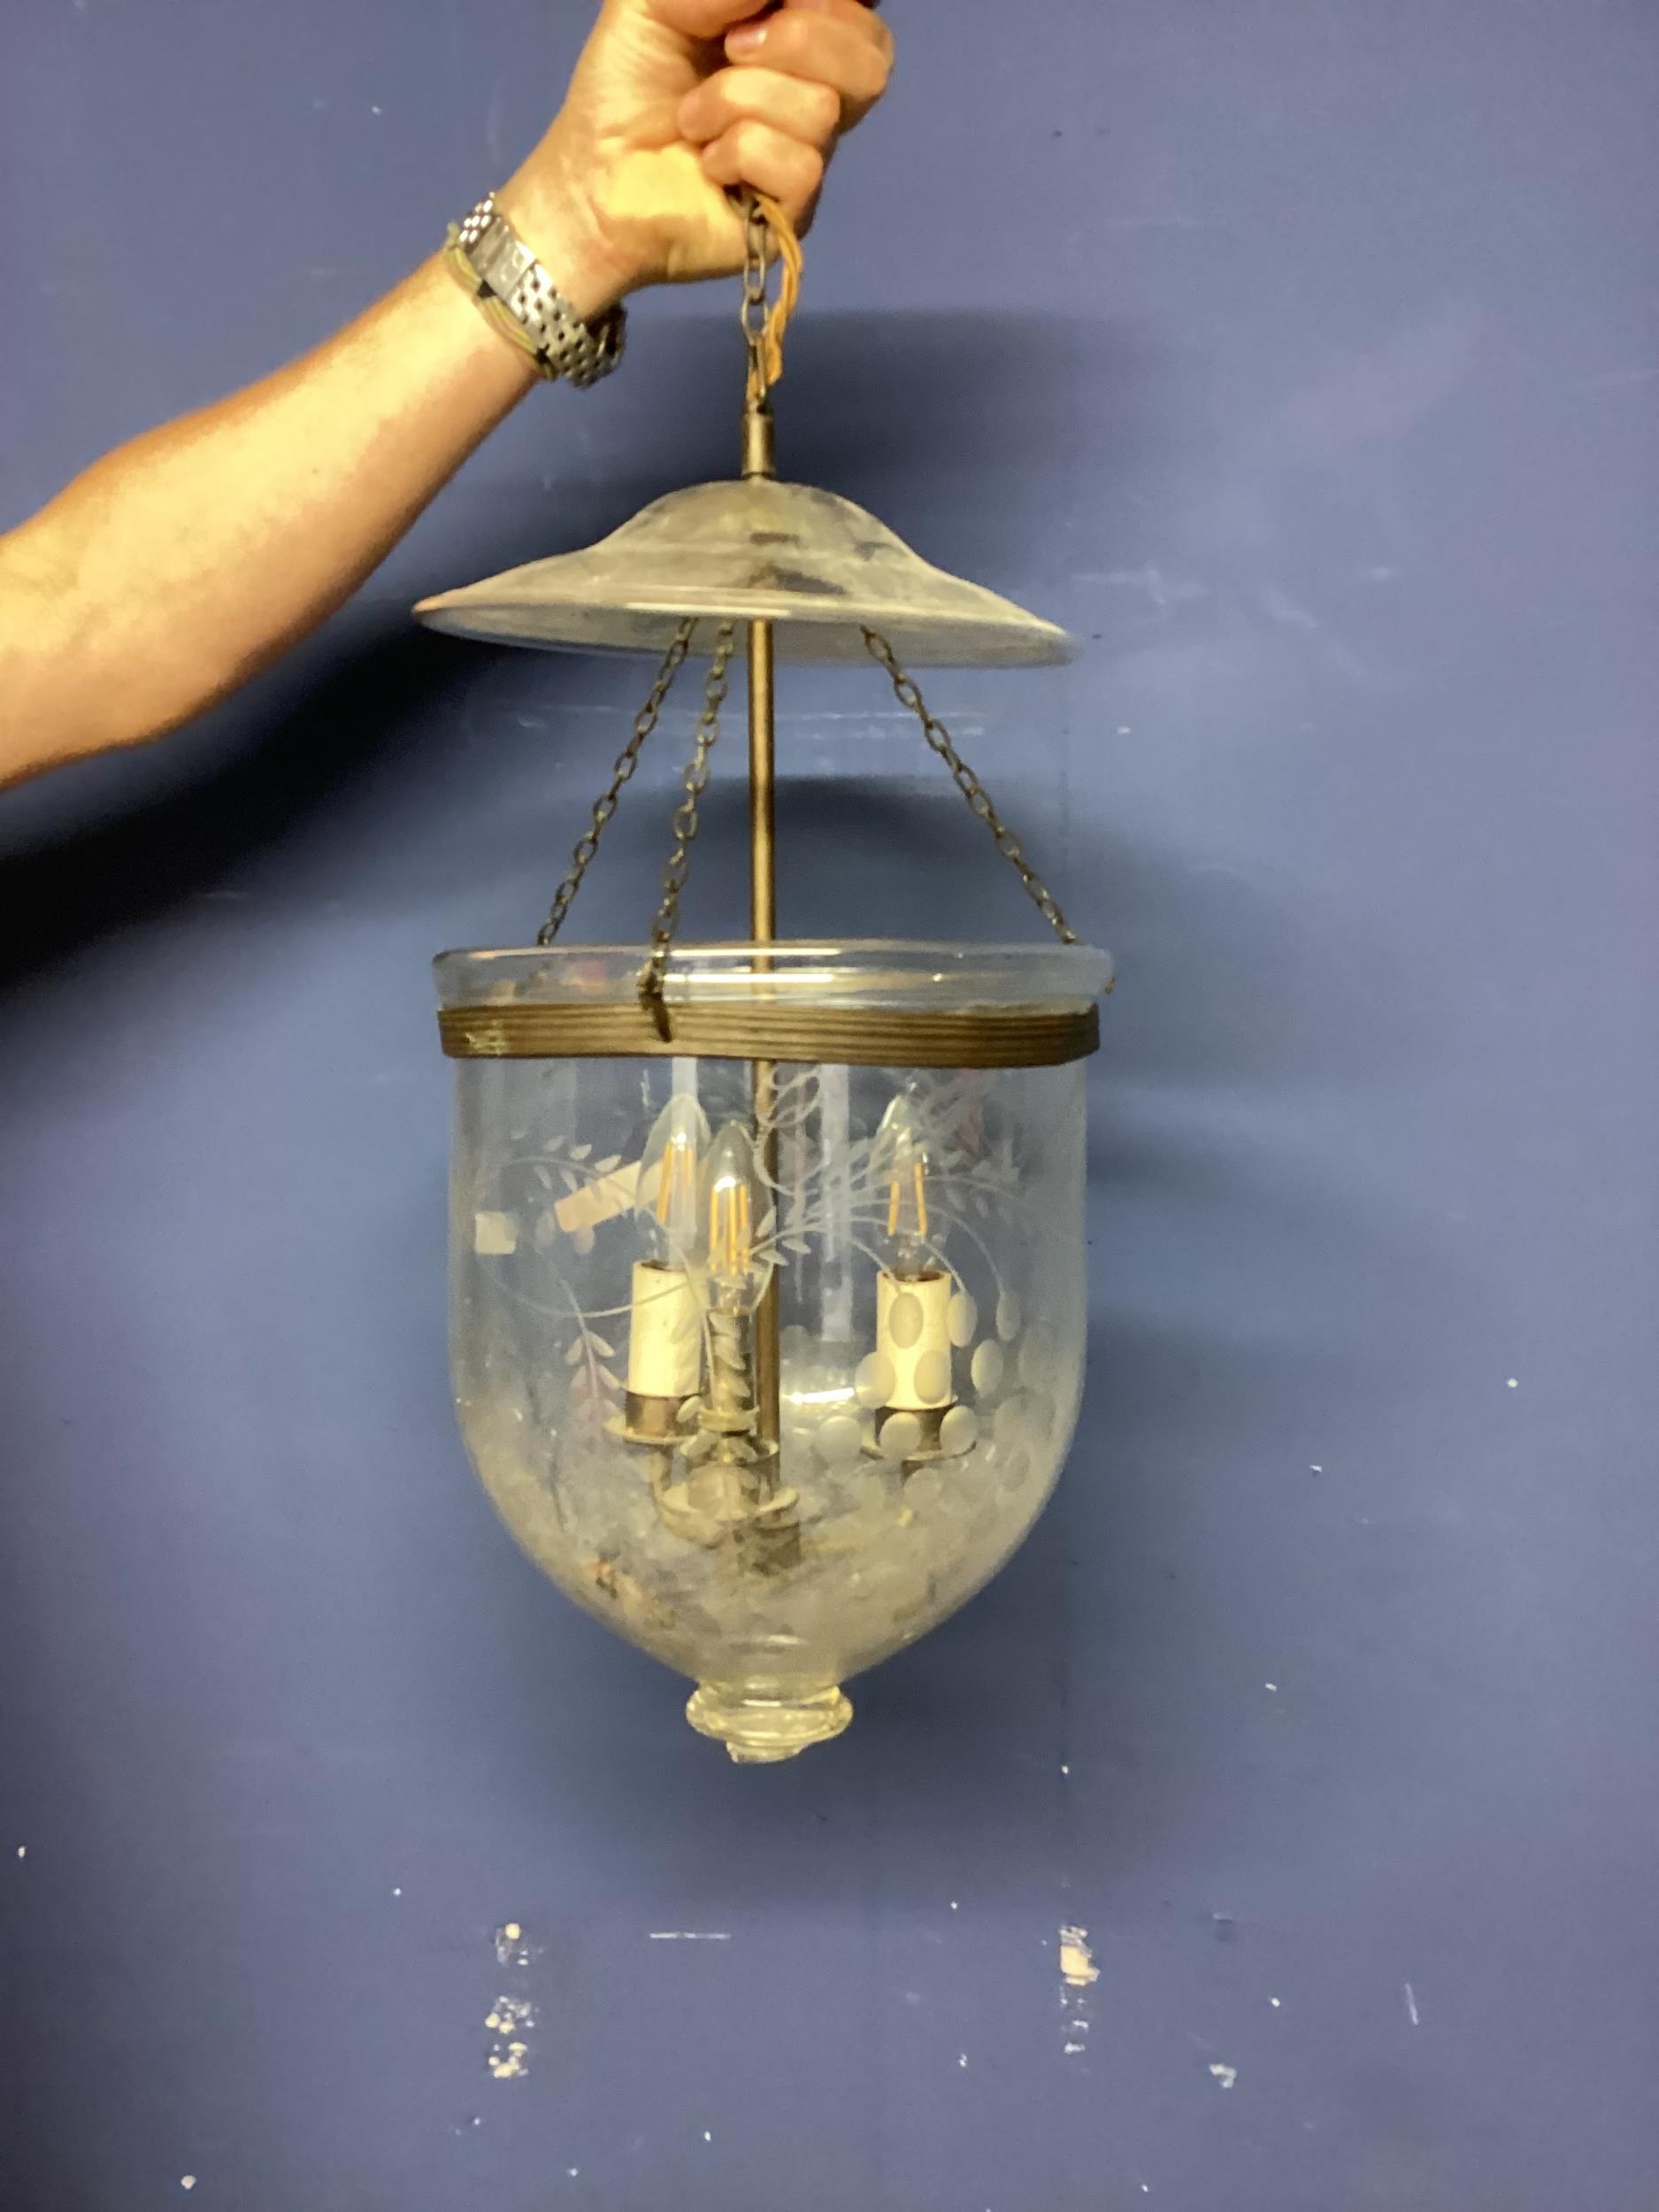 Three rounded glass and metal hanging ceiling lanterns, one with milk glass shade - Image 9 of 17